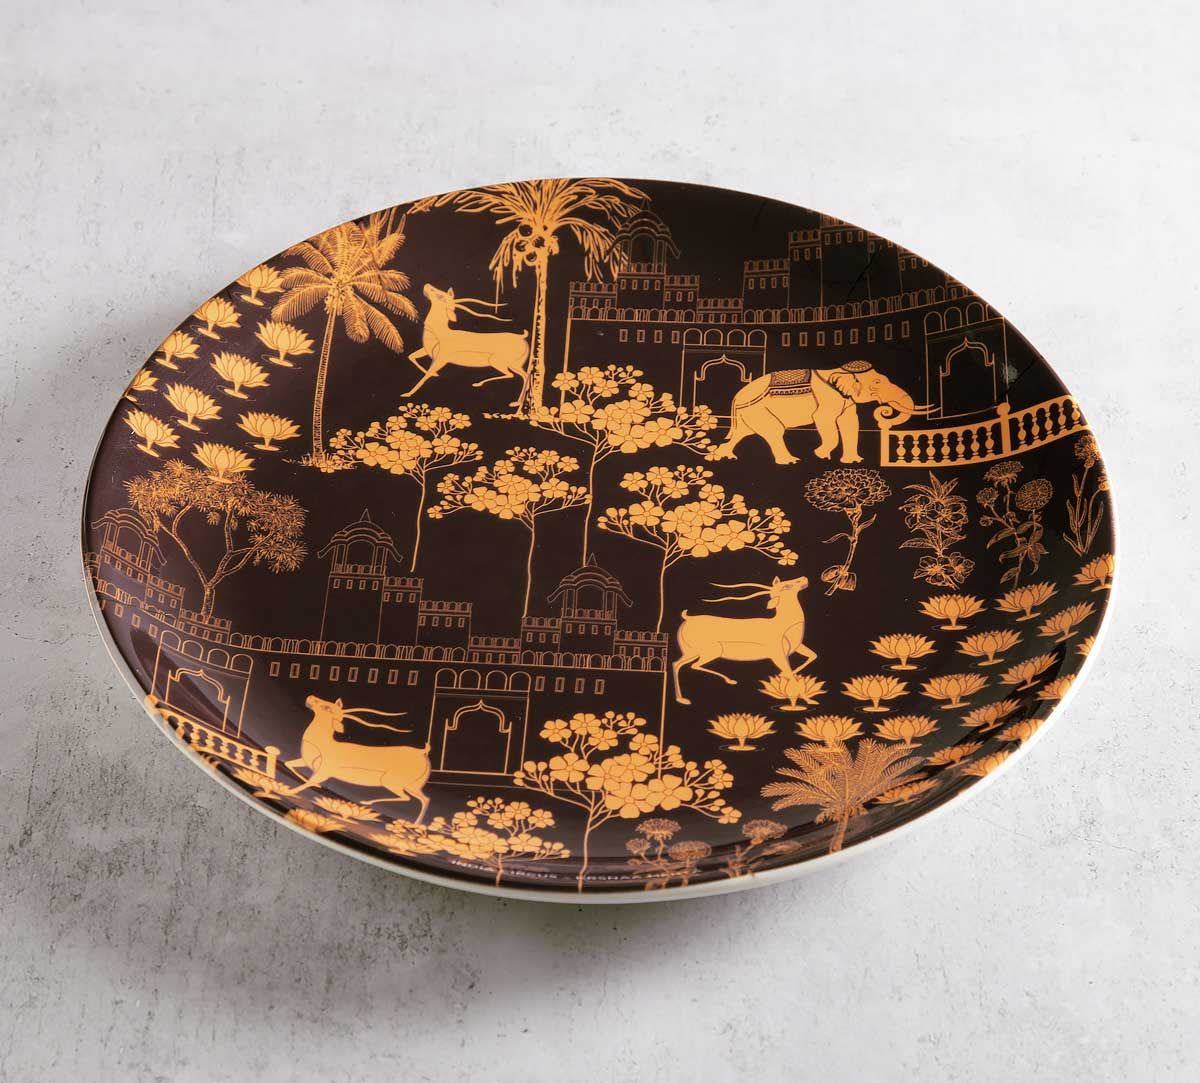 India Circus Palatial Courtyard 10 inch Decorative and Snacks Platter